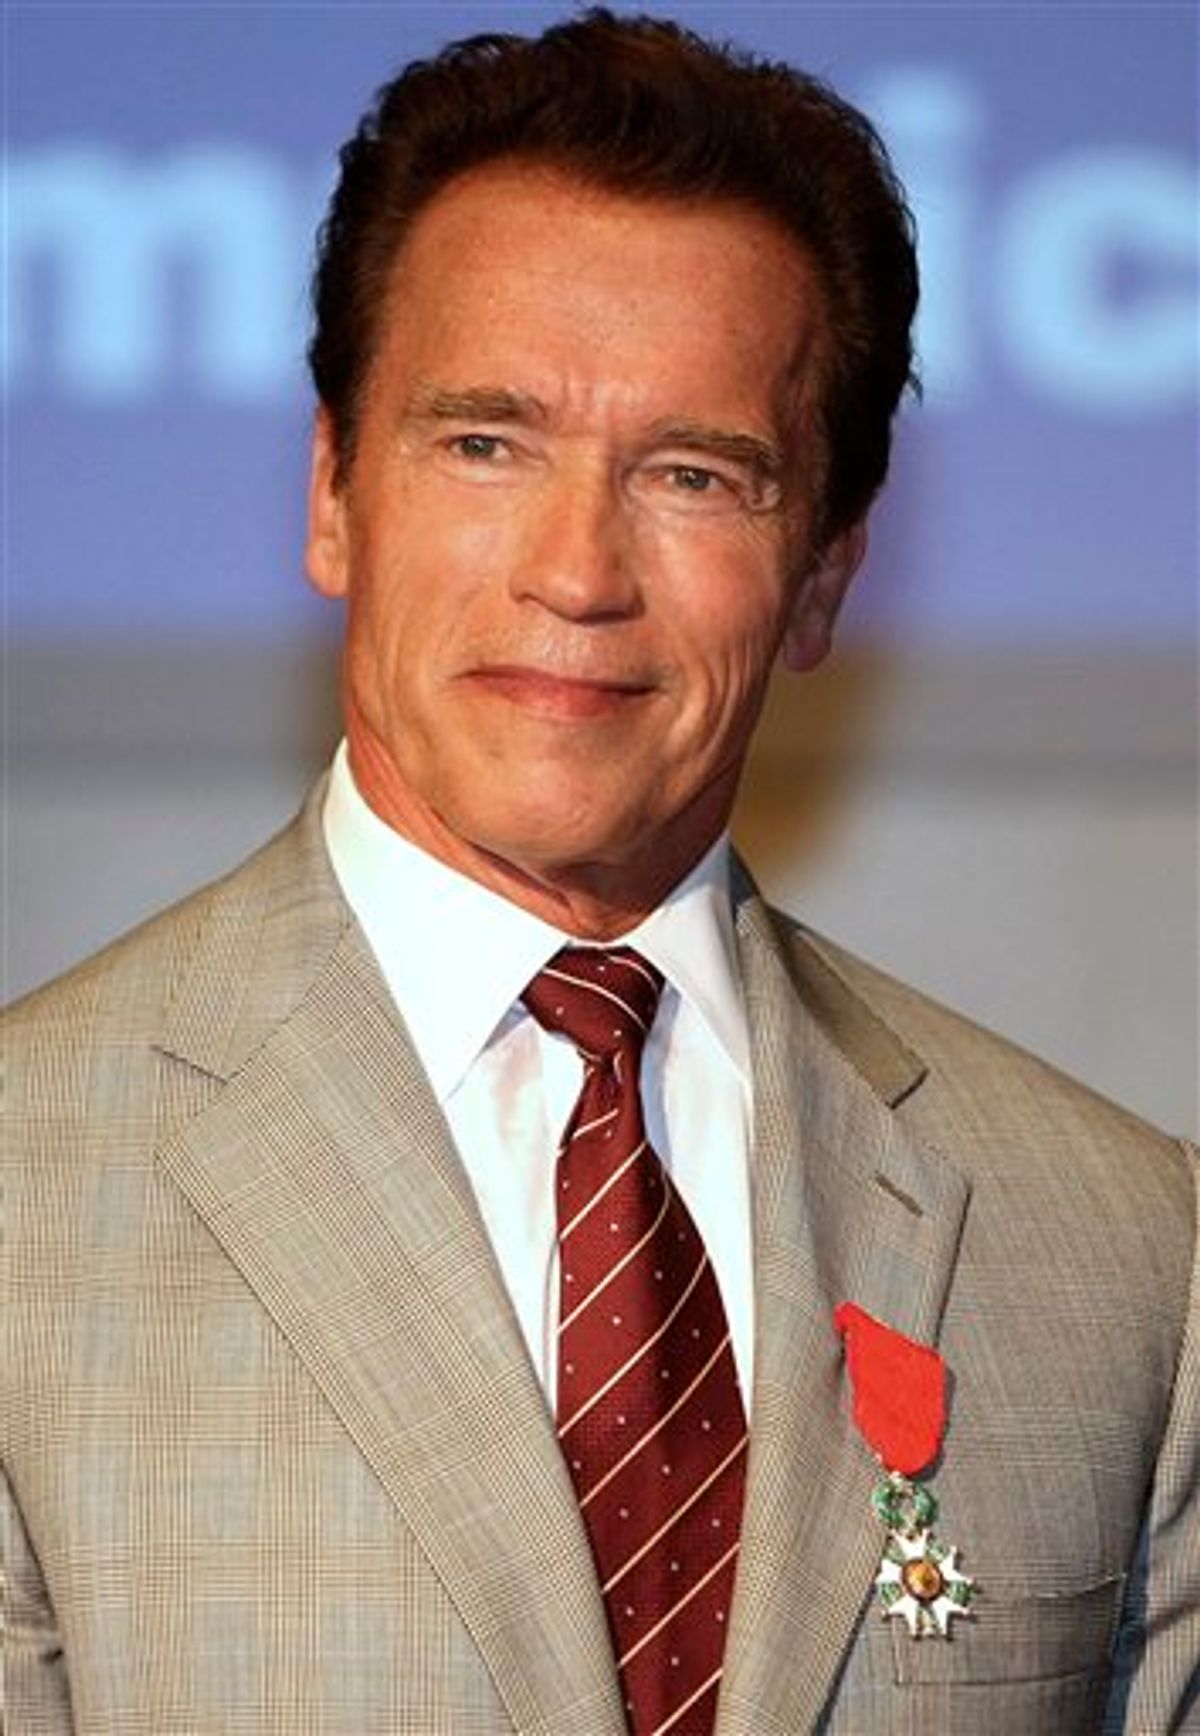 Austrian-American, actor and former California Governor Arnold Schwarzenegger, poses after receiving the insignia of Chevalier in the Order of the Legion of Honor  during the MIPTV (International Television Programme Market), Monday, April 4, 2011, in Cannes, southern France. Arnold Schwarzenegger is back in Cannes for the first time in eight years to unveil a new international television series "The Governator". (AP Photo/Lionel Cironneau) (AP)